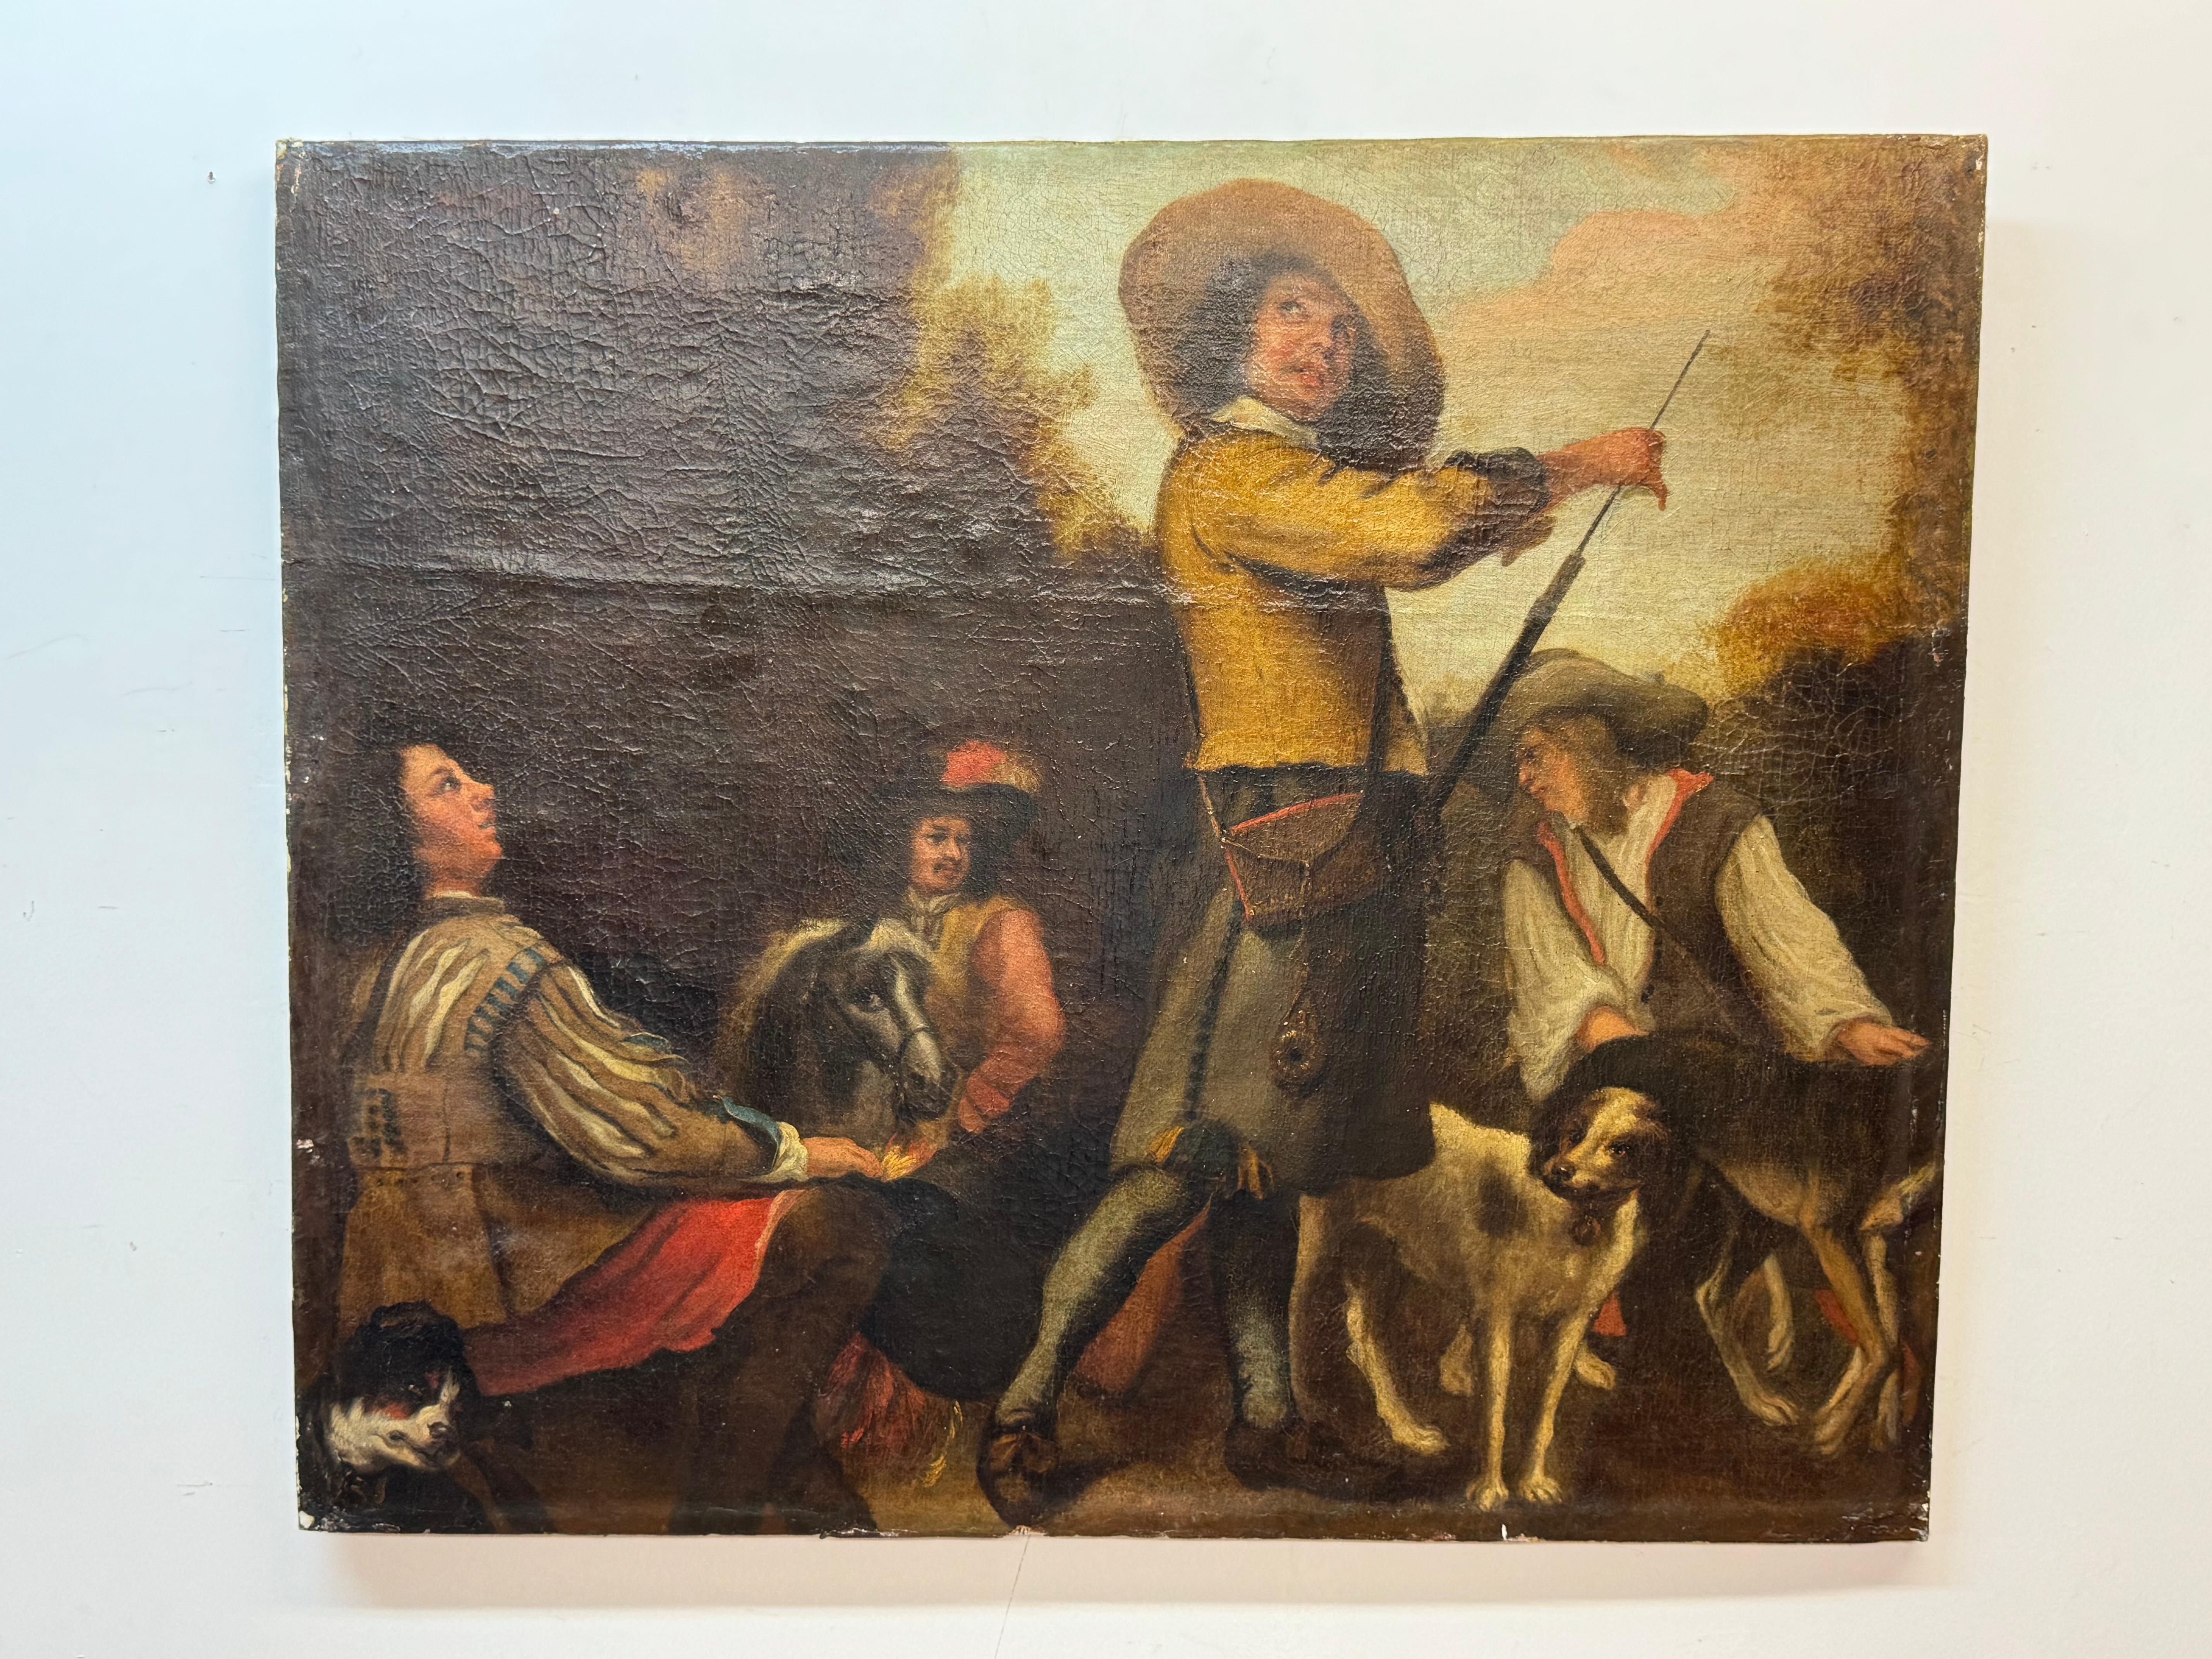 Unknown Figurative Painting - Old master landscape of musketeers/Huntsman gathered with their dogs and horses